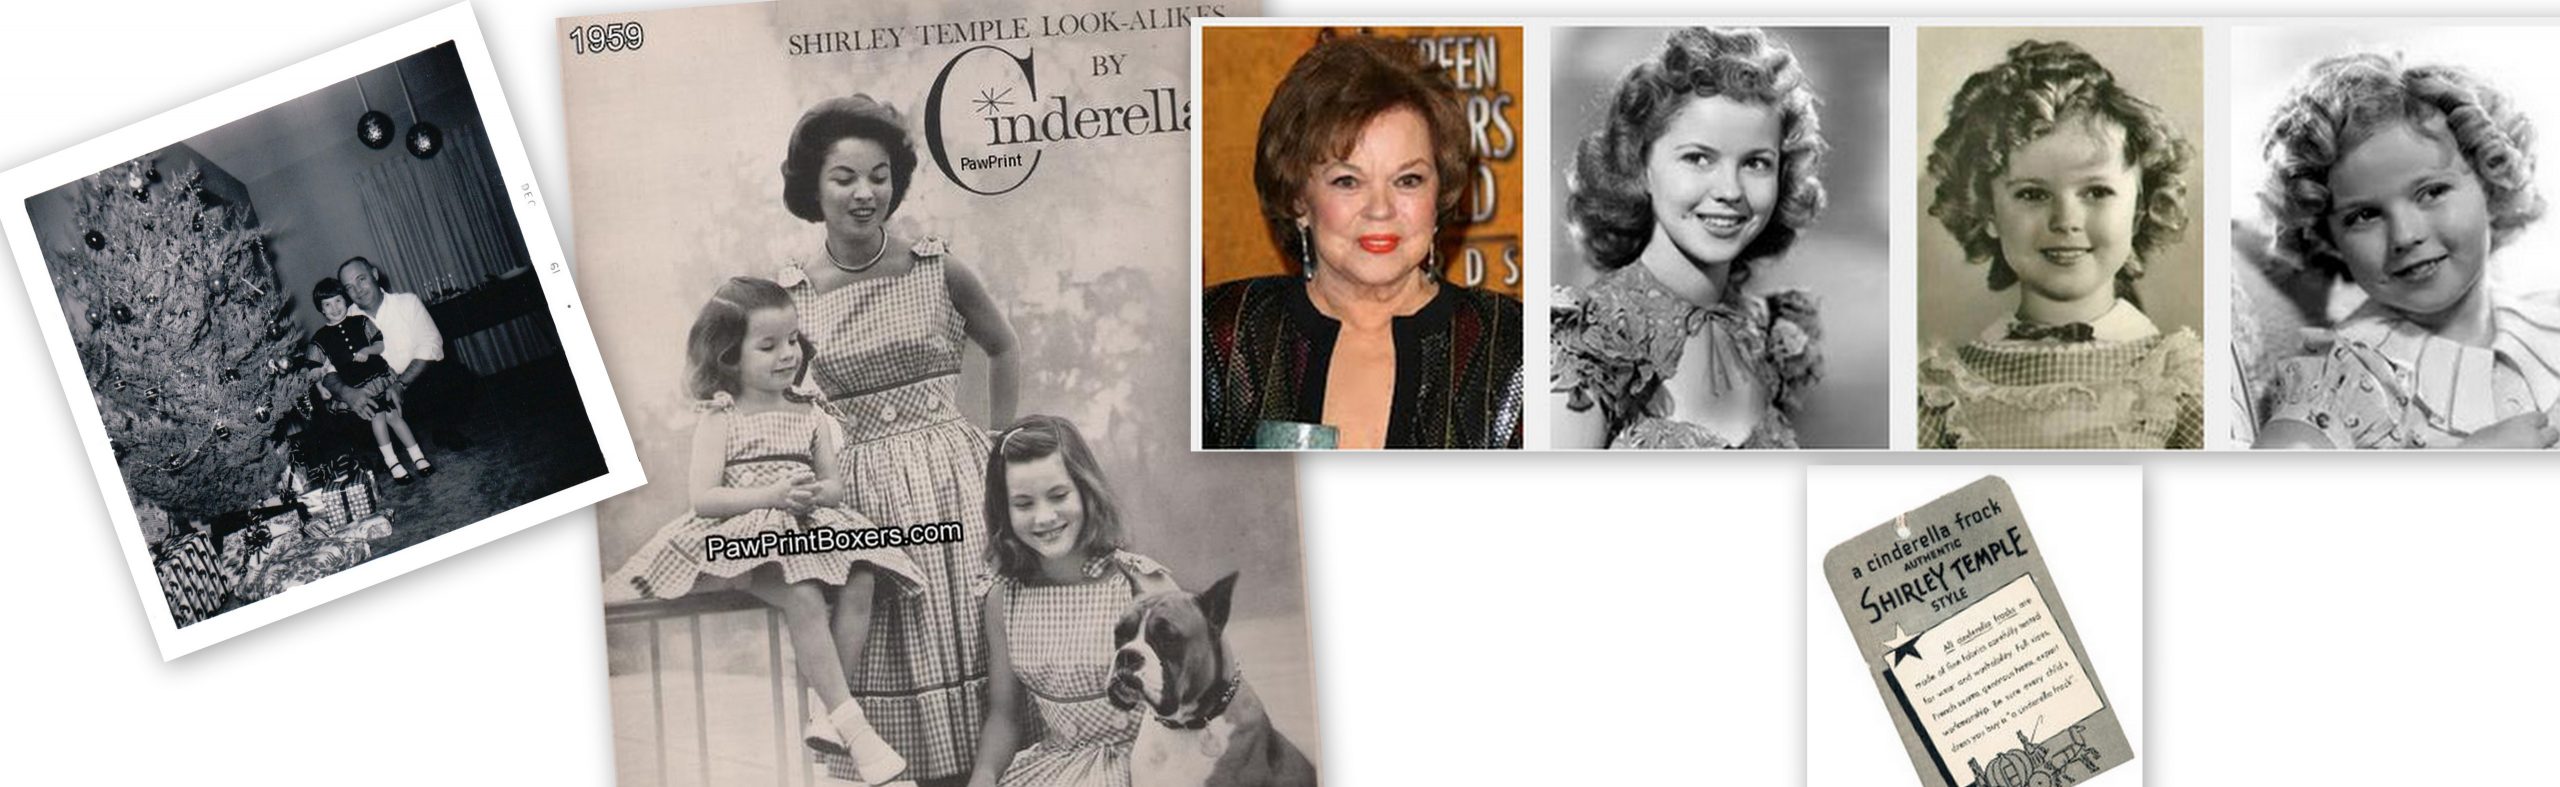 The Loss of Shirley Temple and the Little Girl Dress